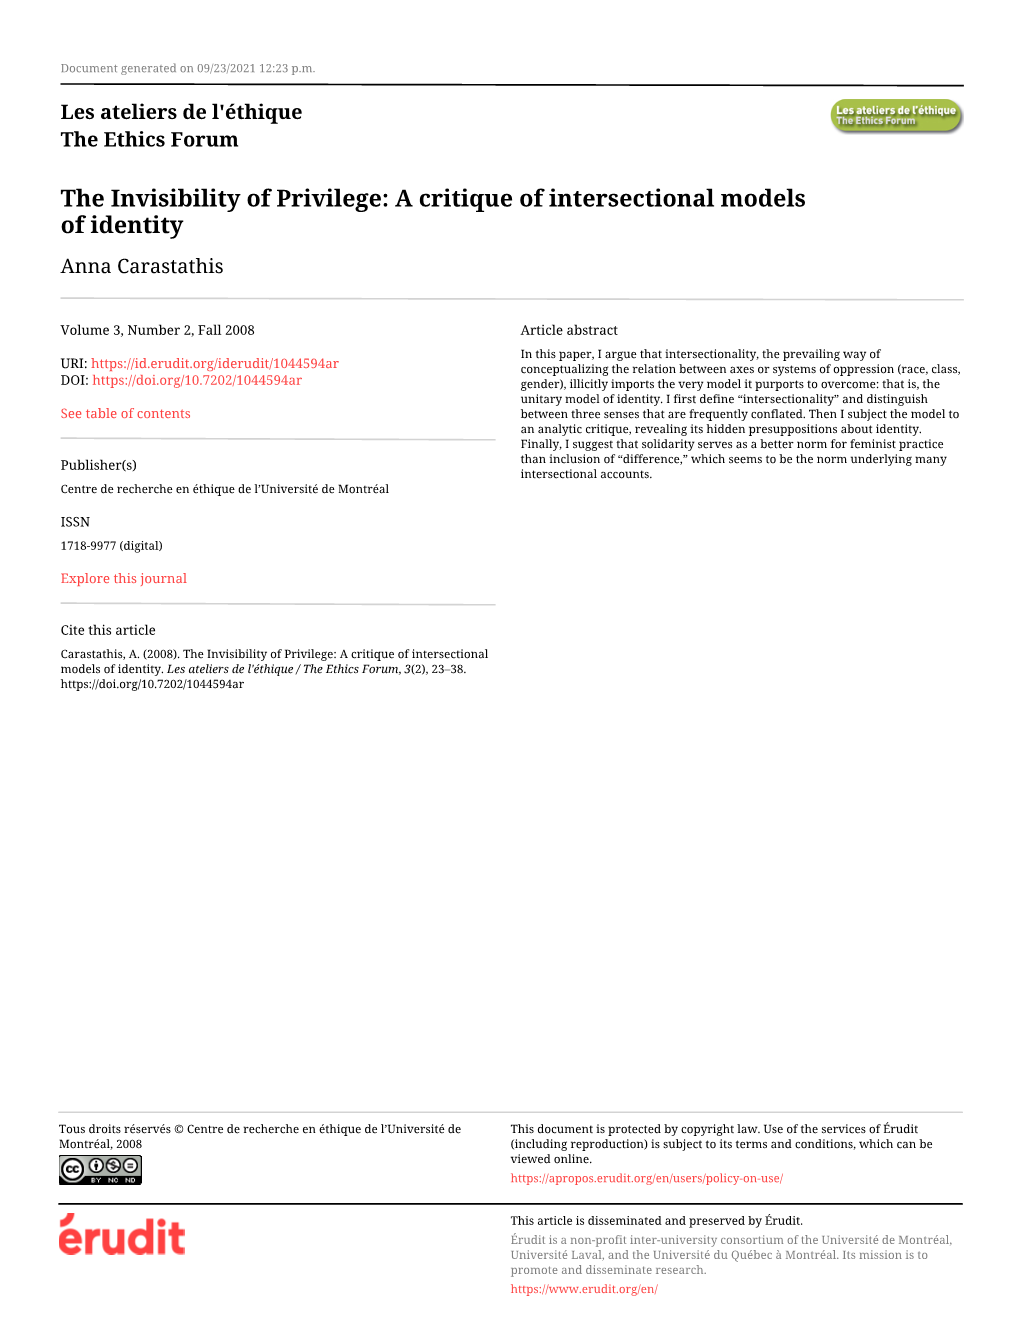 The Invisibility of Privilege: a Critique of Intersectional Models of Identity Anna Carastathis